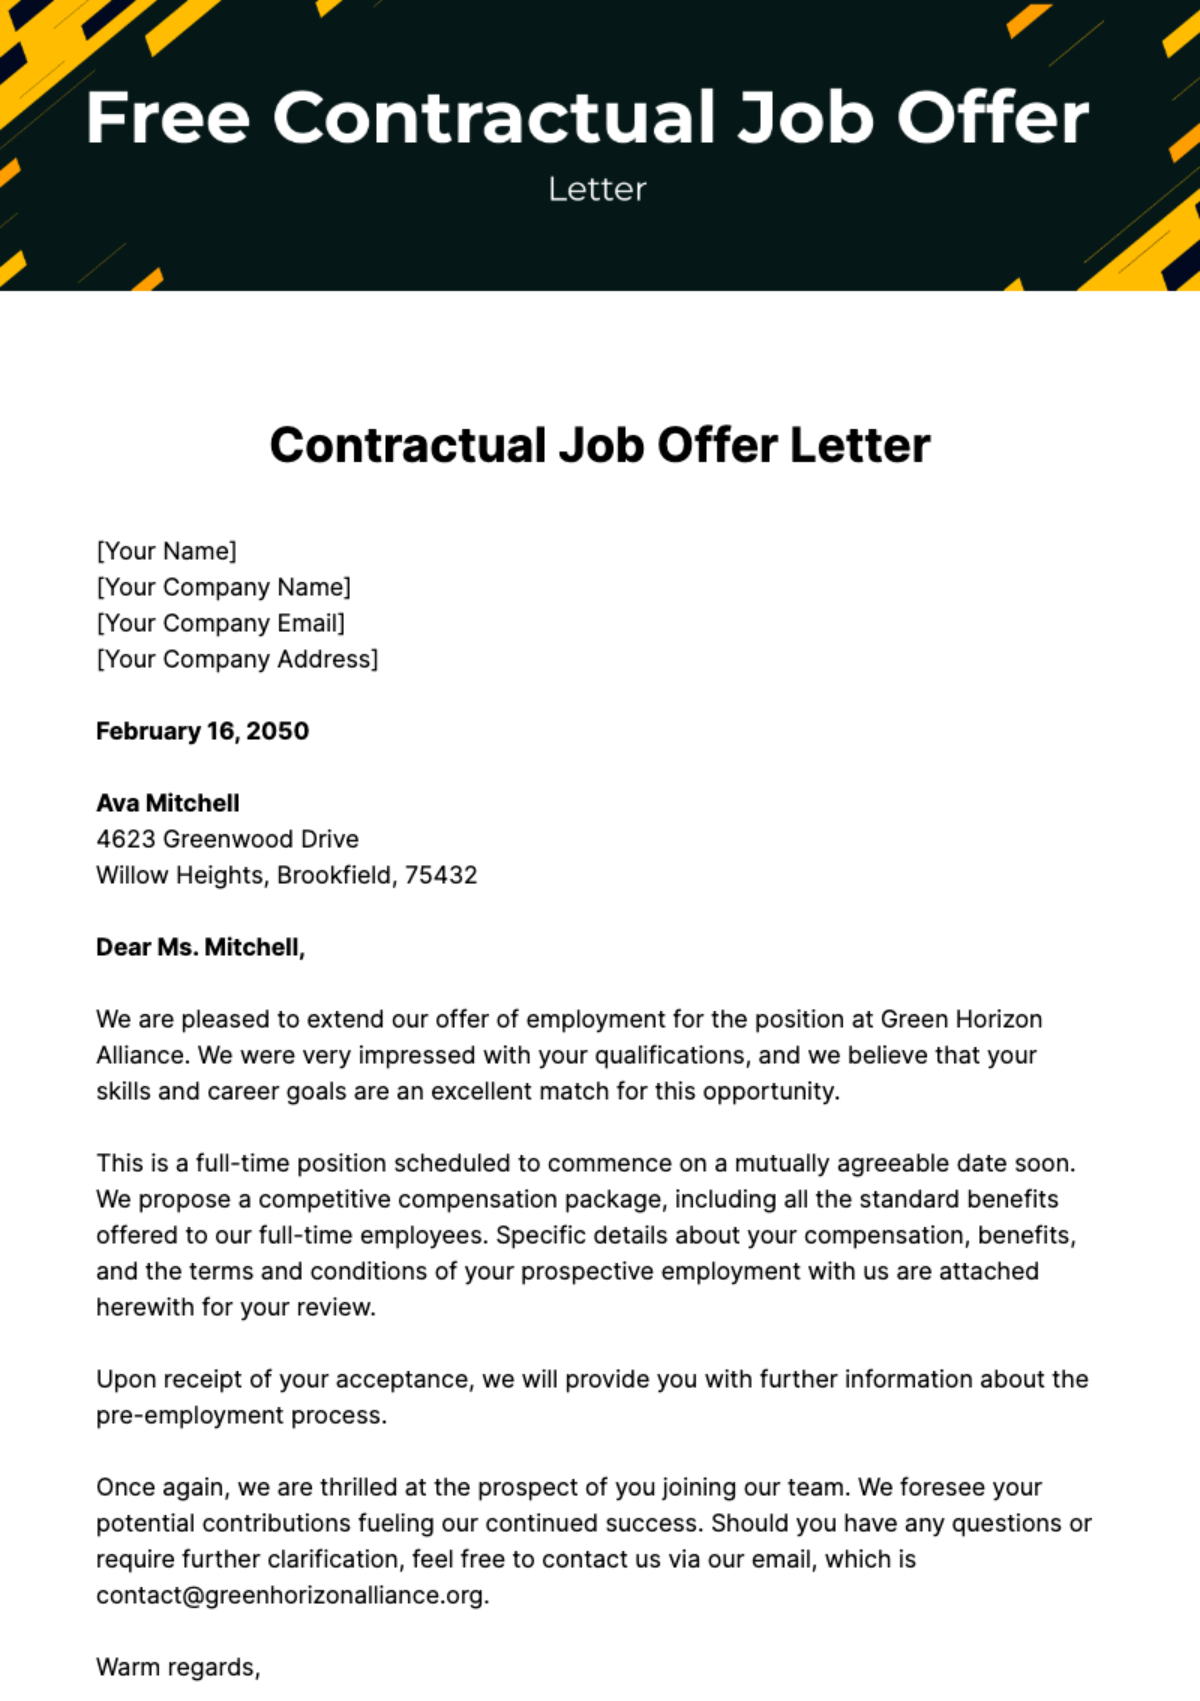 Free Contractual Job Offer Letter Template